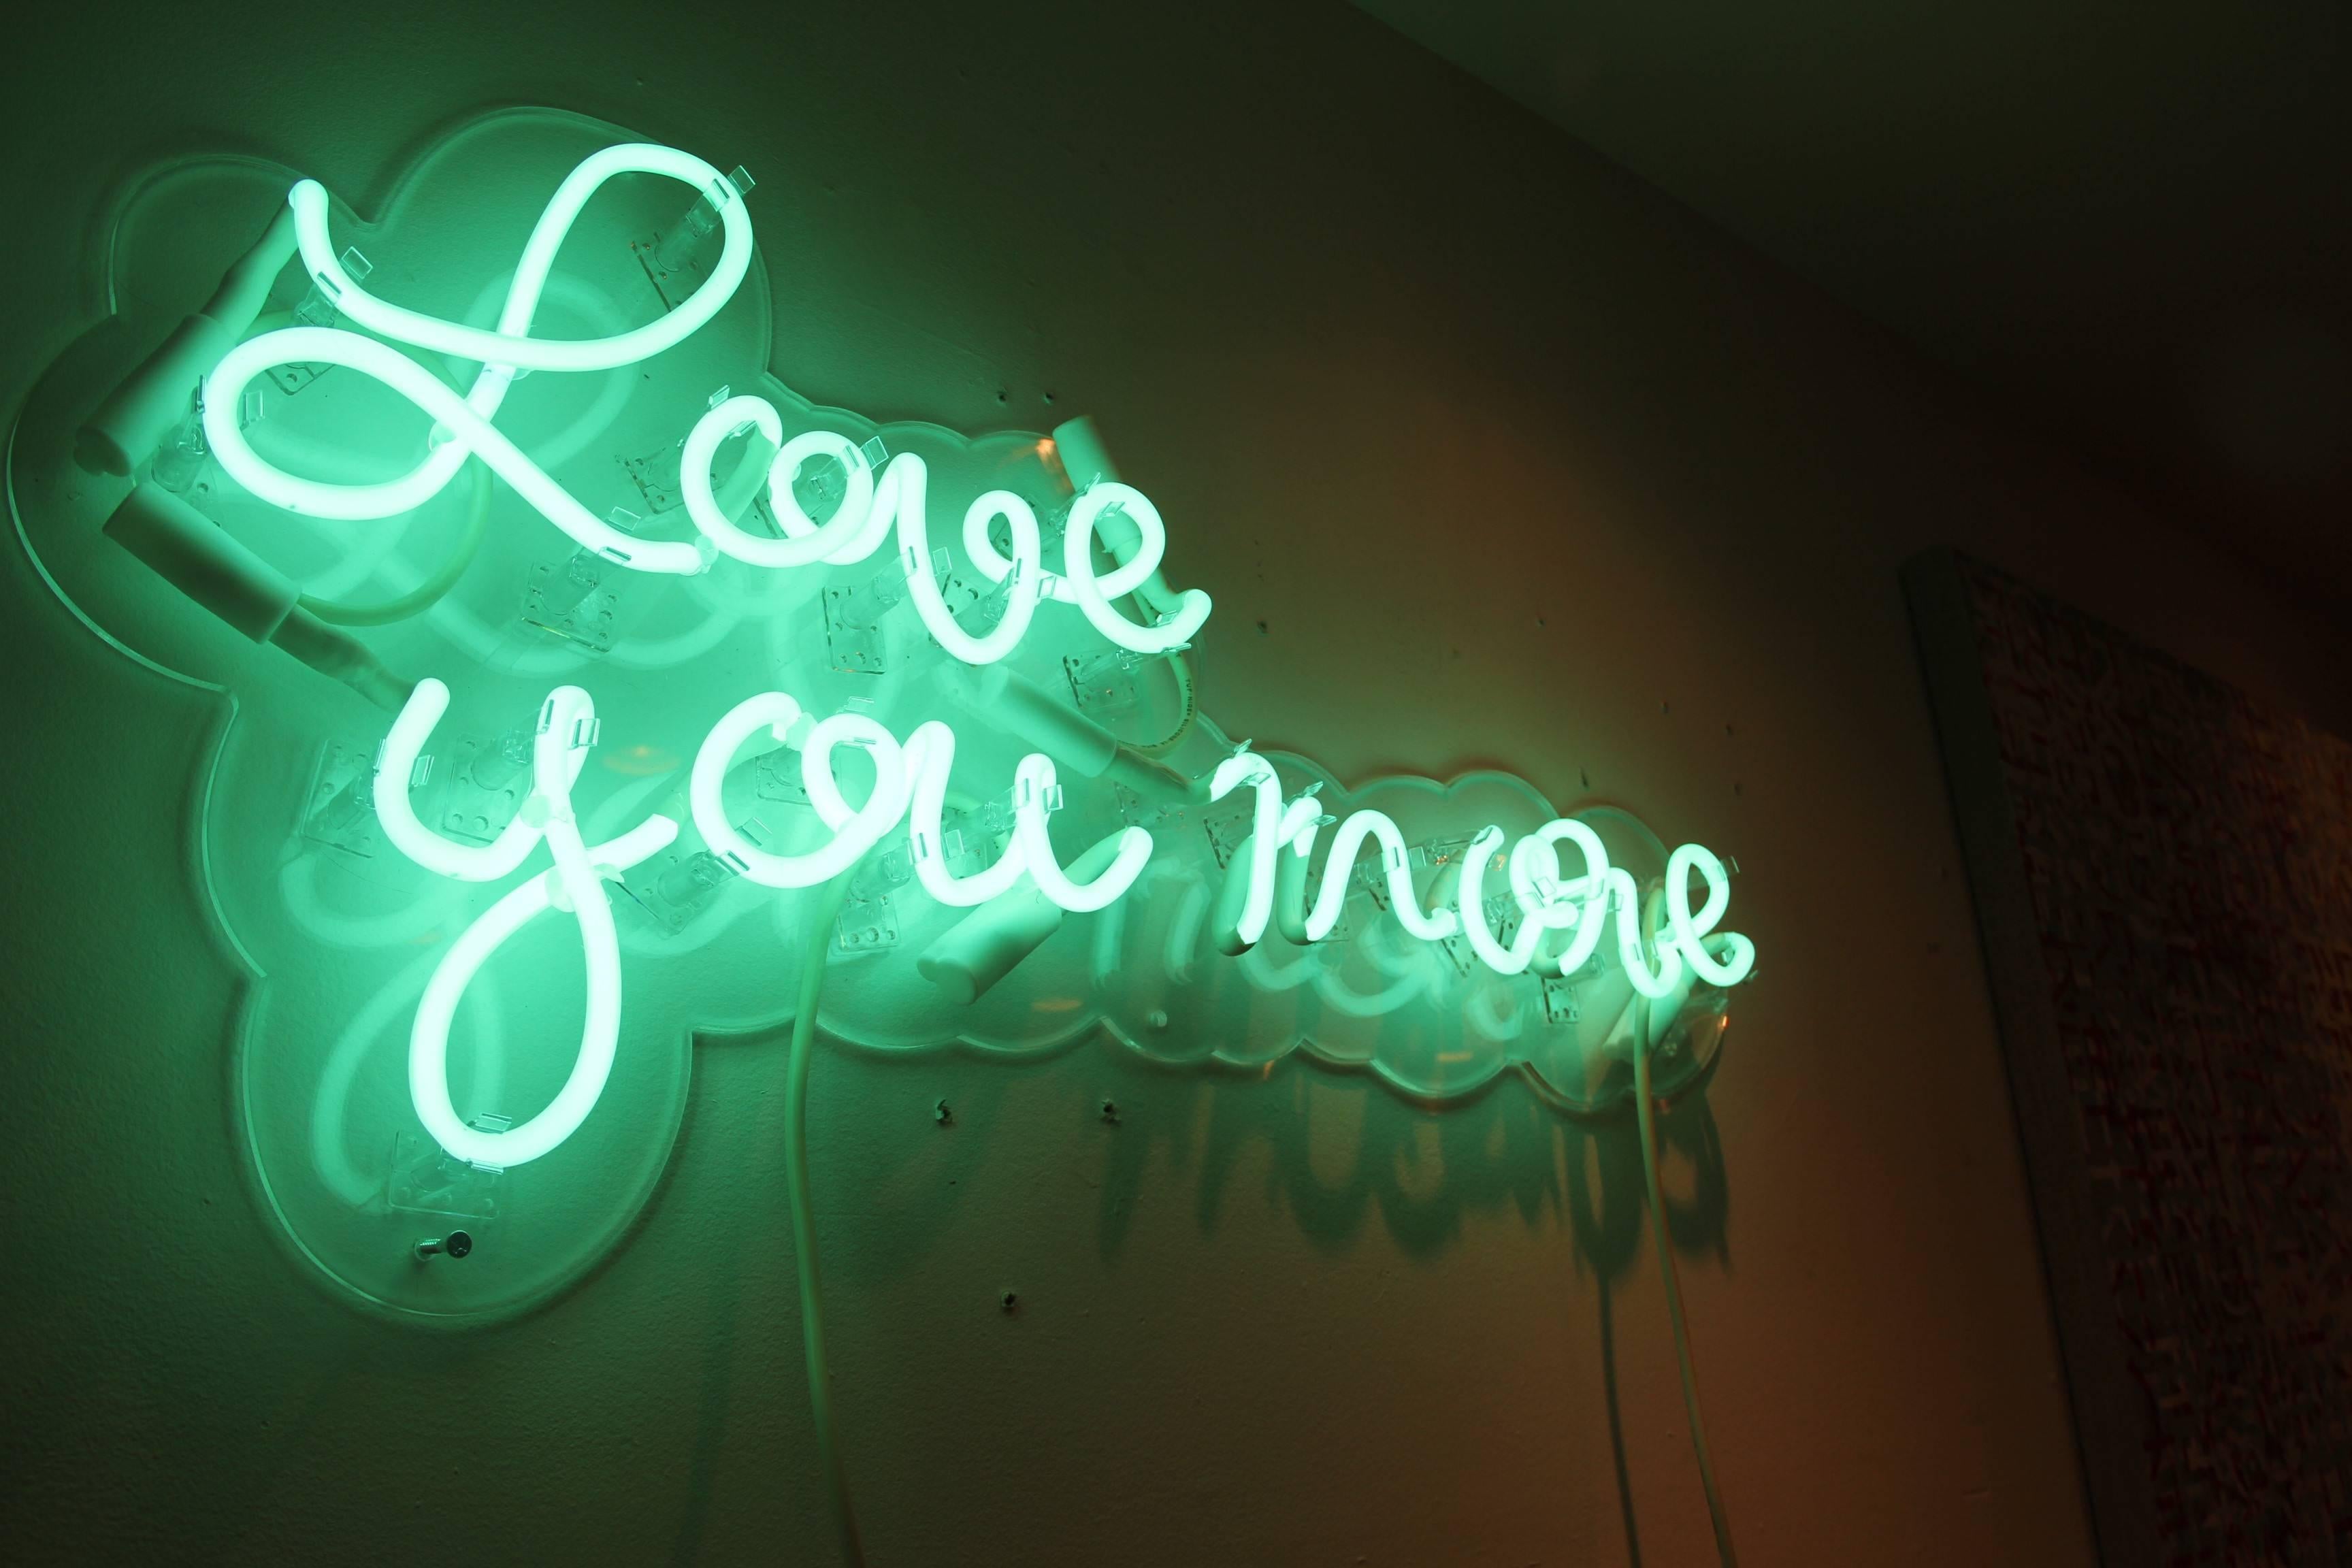 Love you more - neon art work - Sculpture by Mary Jo McGonagle